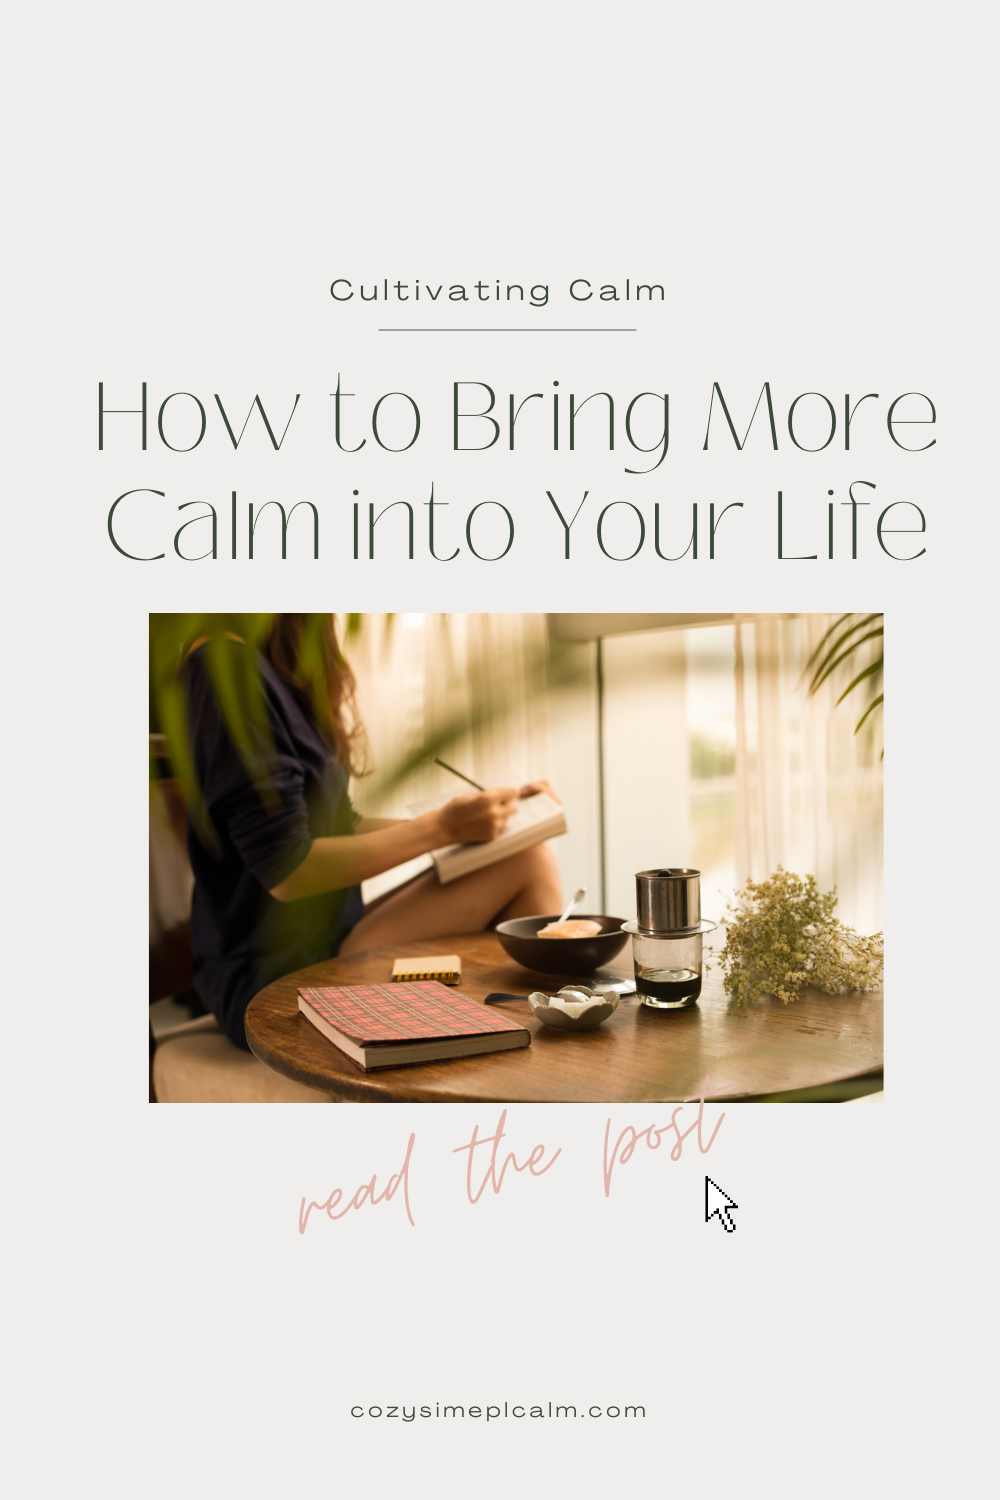 Image of woman writing in notebook next to table and window - Text overlay: Cultivating calm, how to bring more calm into your life - cozysimplecalm.com